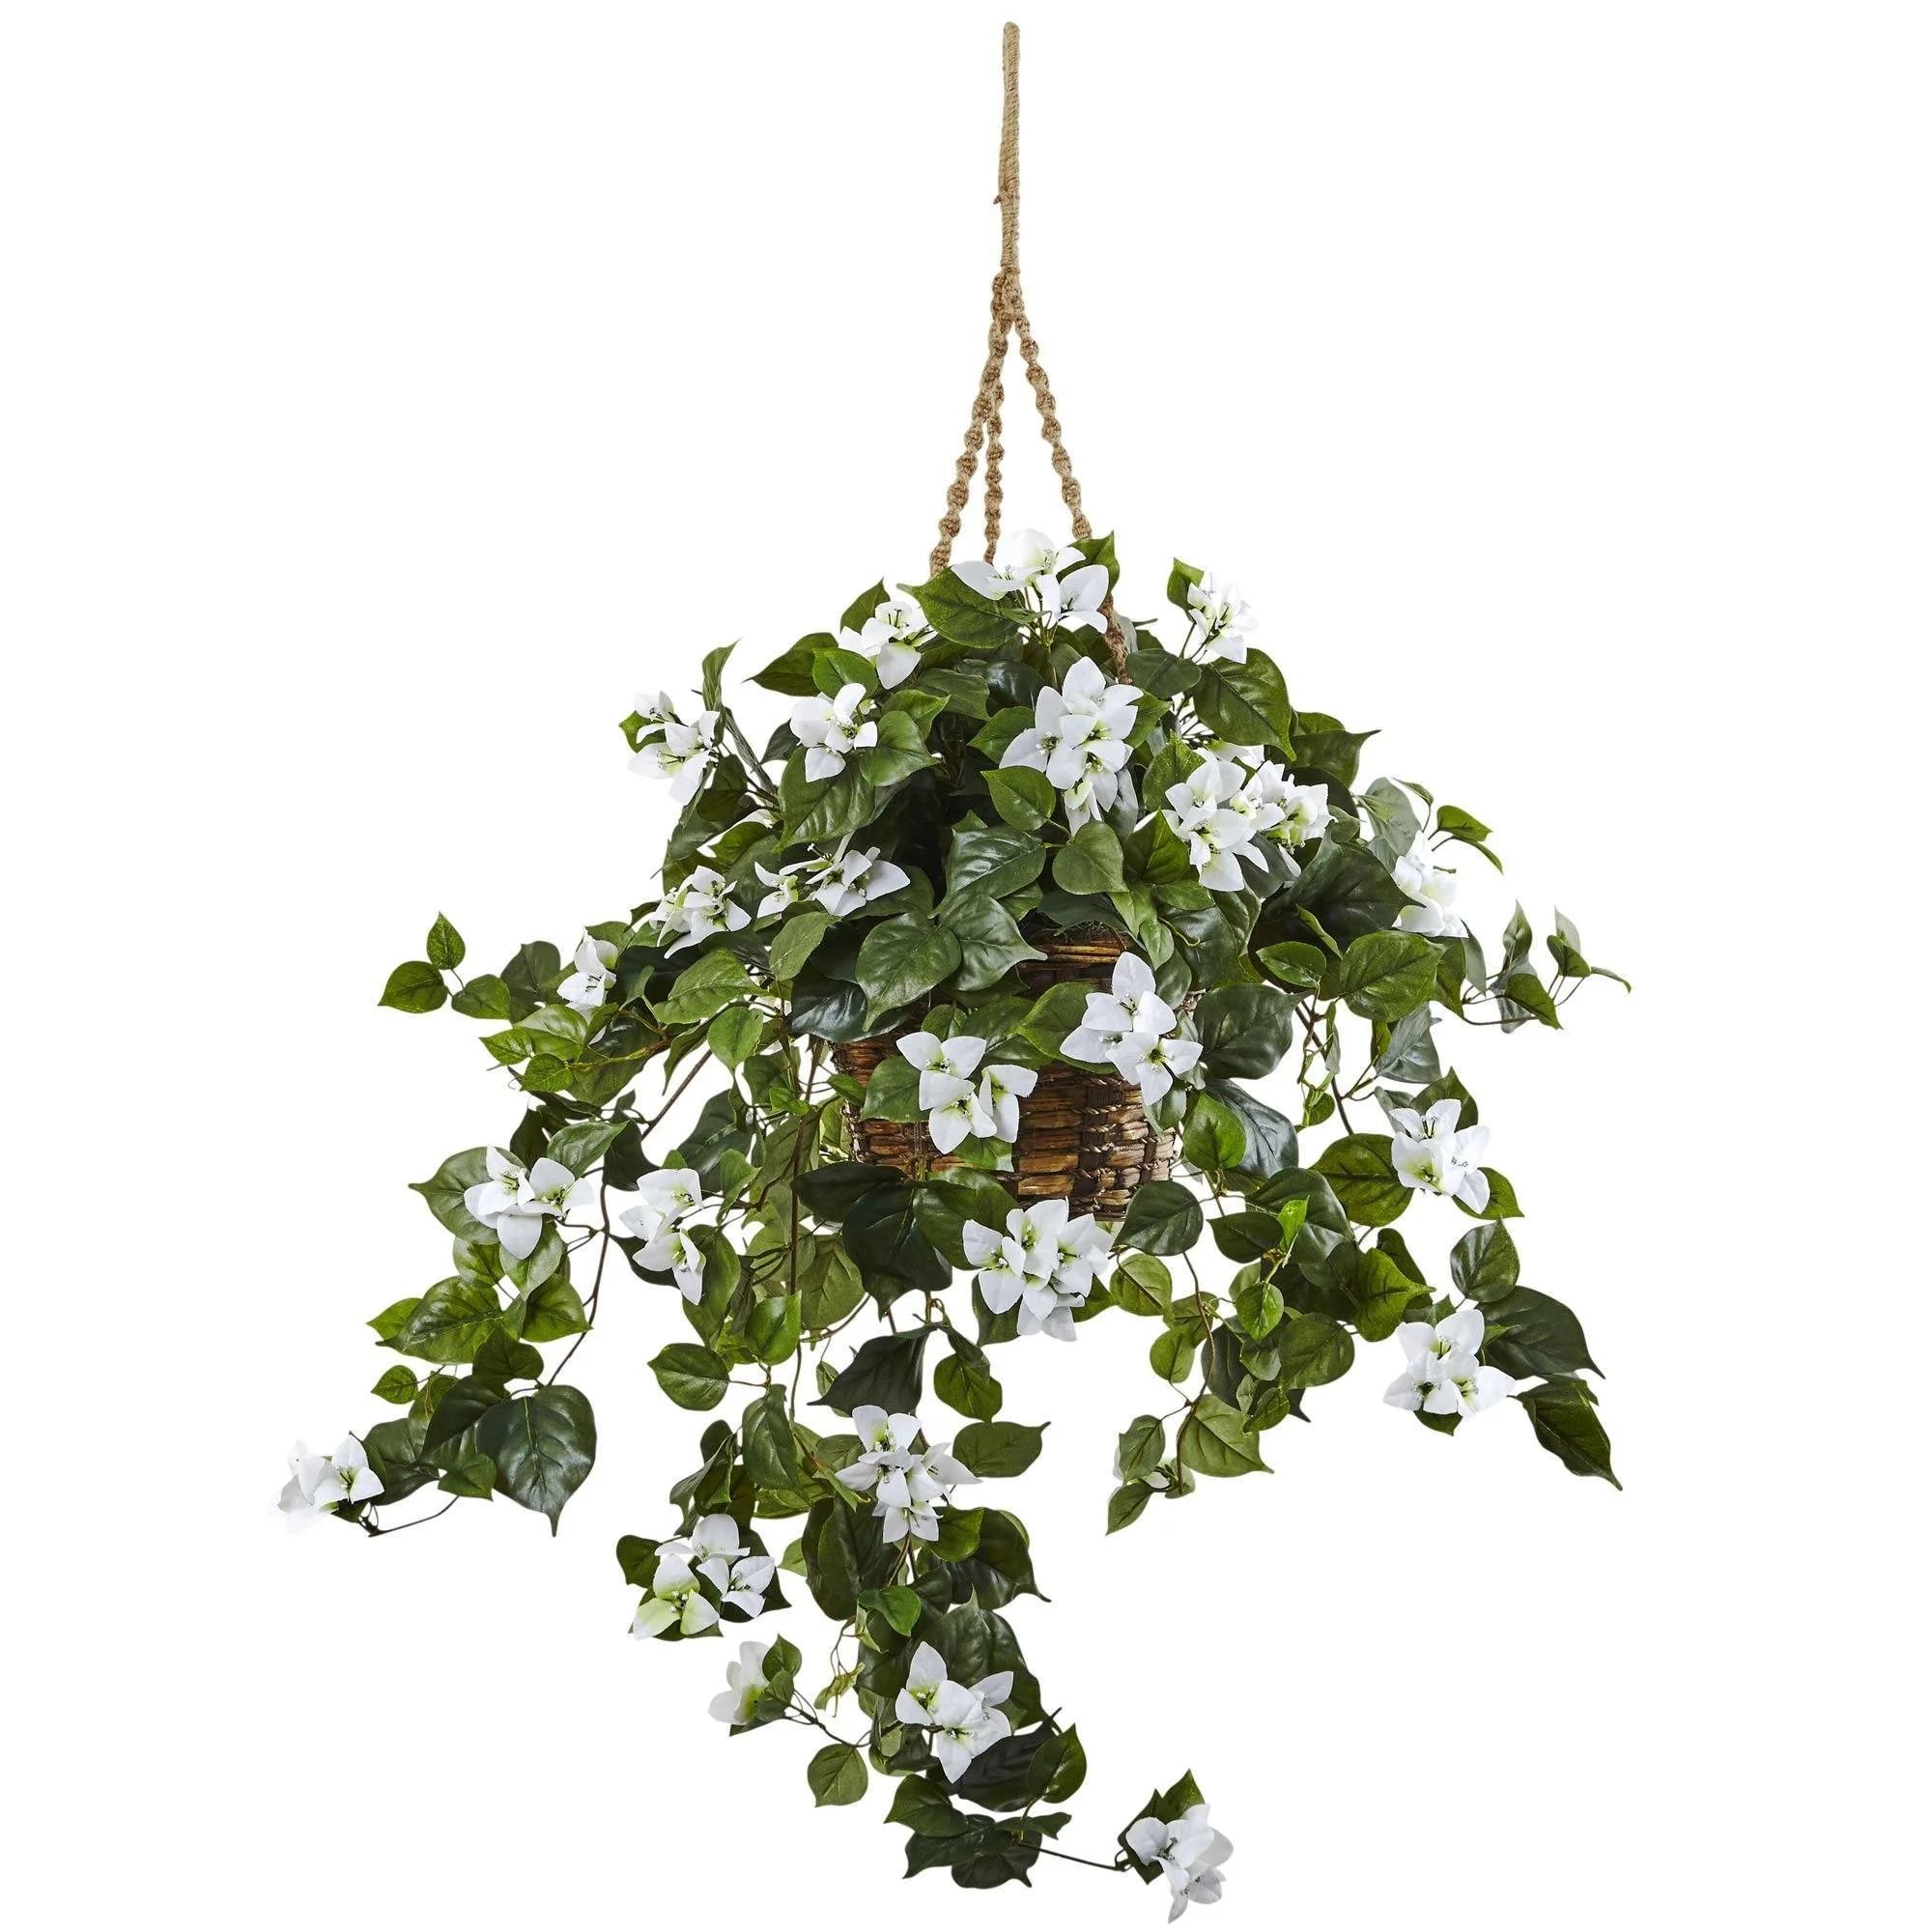 Bougainvillea Hanging Basket | Nearly Natural | Nearly Natural